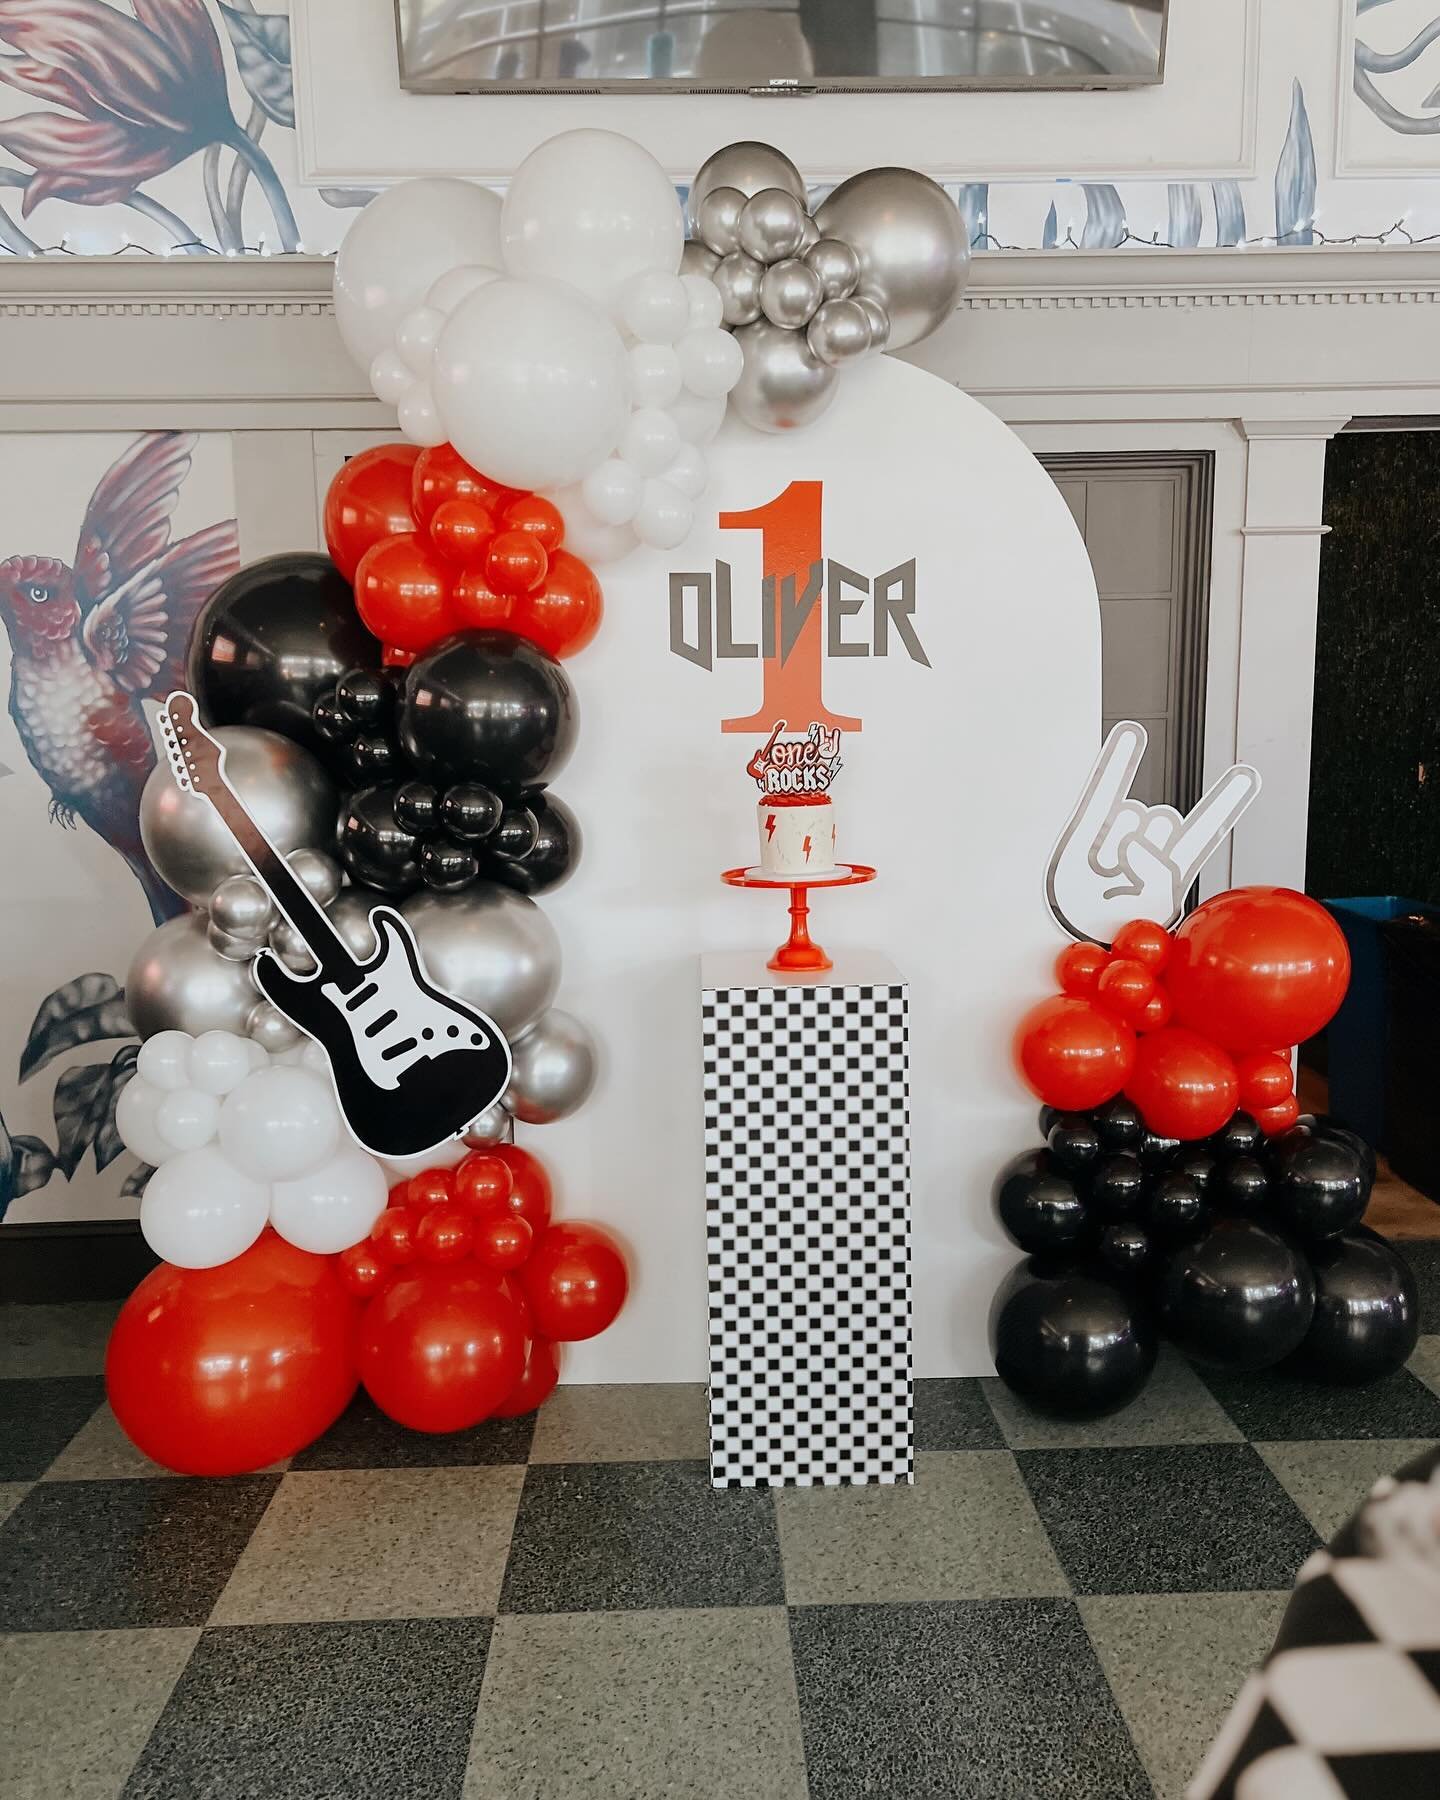 Get your air guitars ready! 🎸🤘

We partied like rockstars at Oliver&rsquo;s first birthday party! The pop of red and checkered pattern were the perfect finishing touches for this epic birthday bash.

Need some rockstar energy at your next celebrati